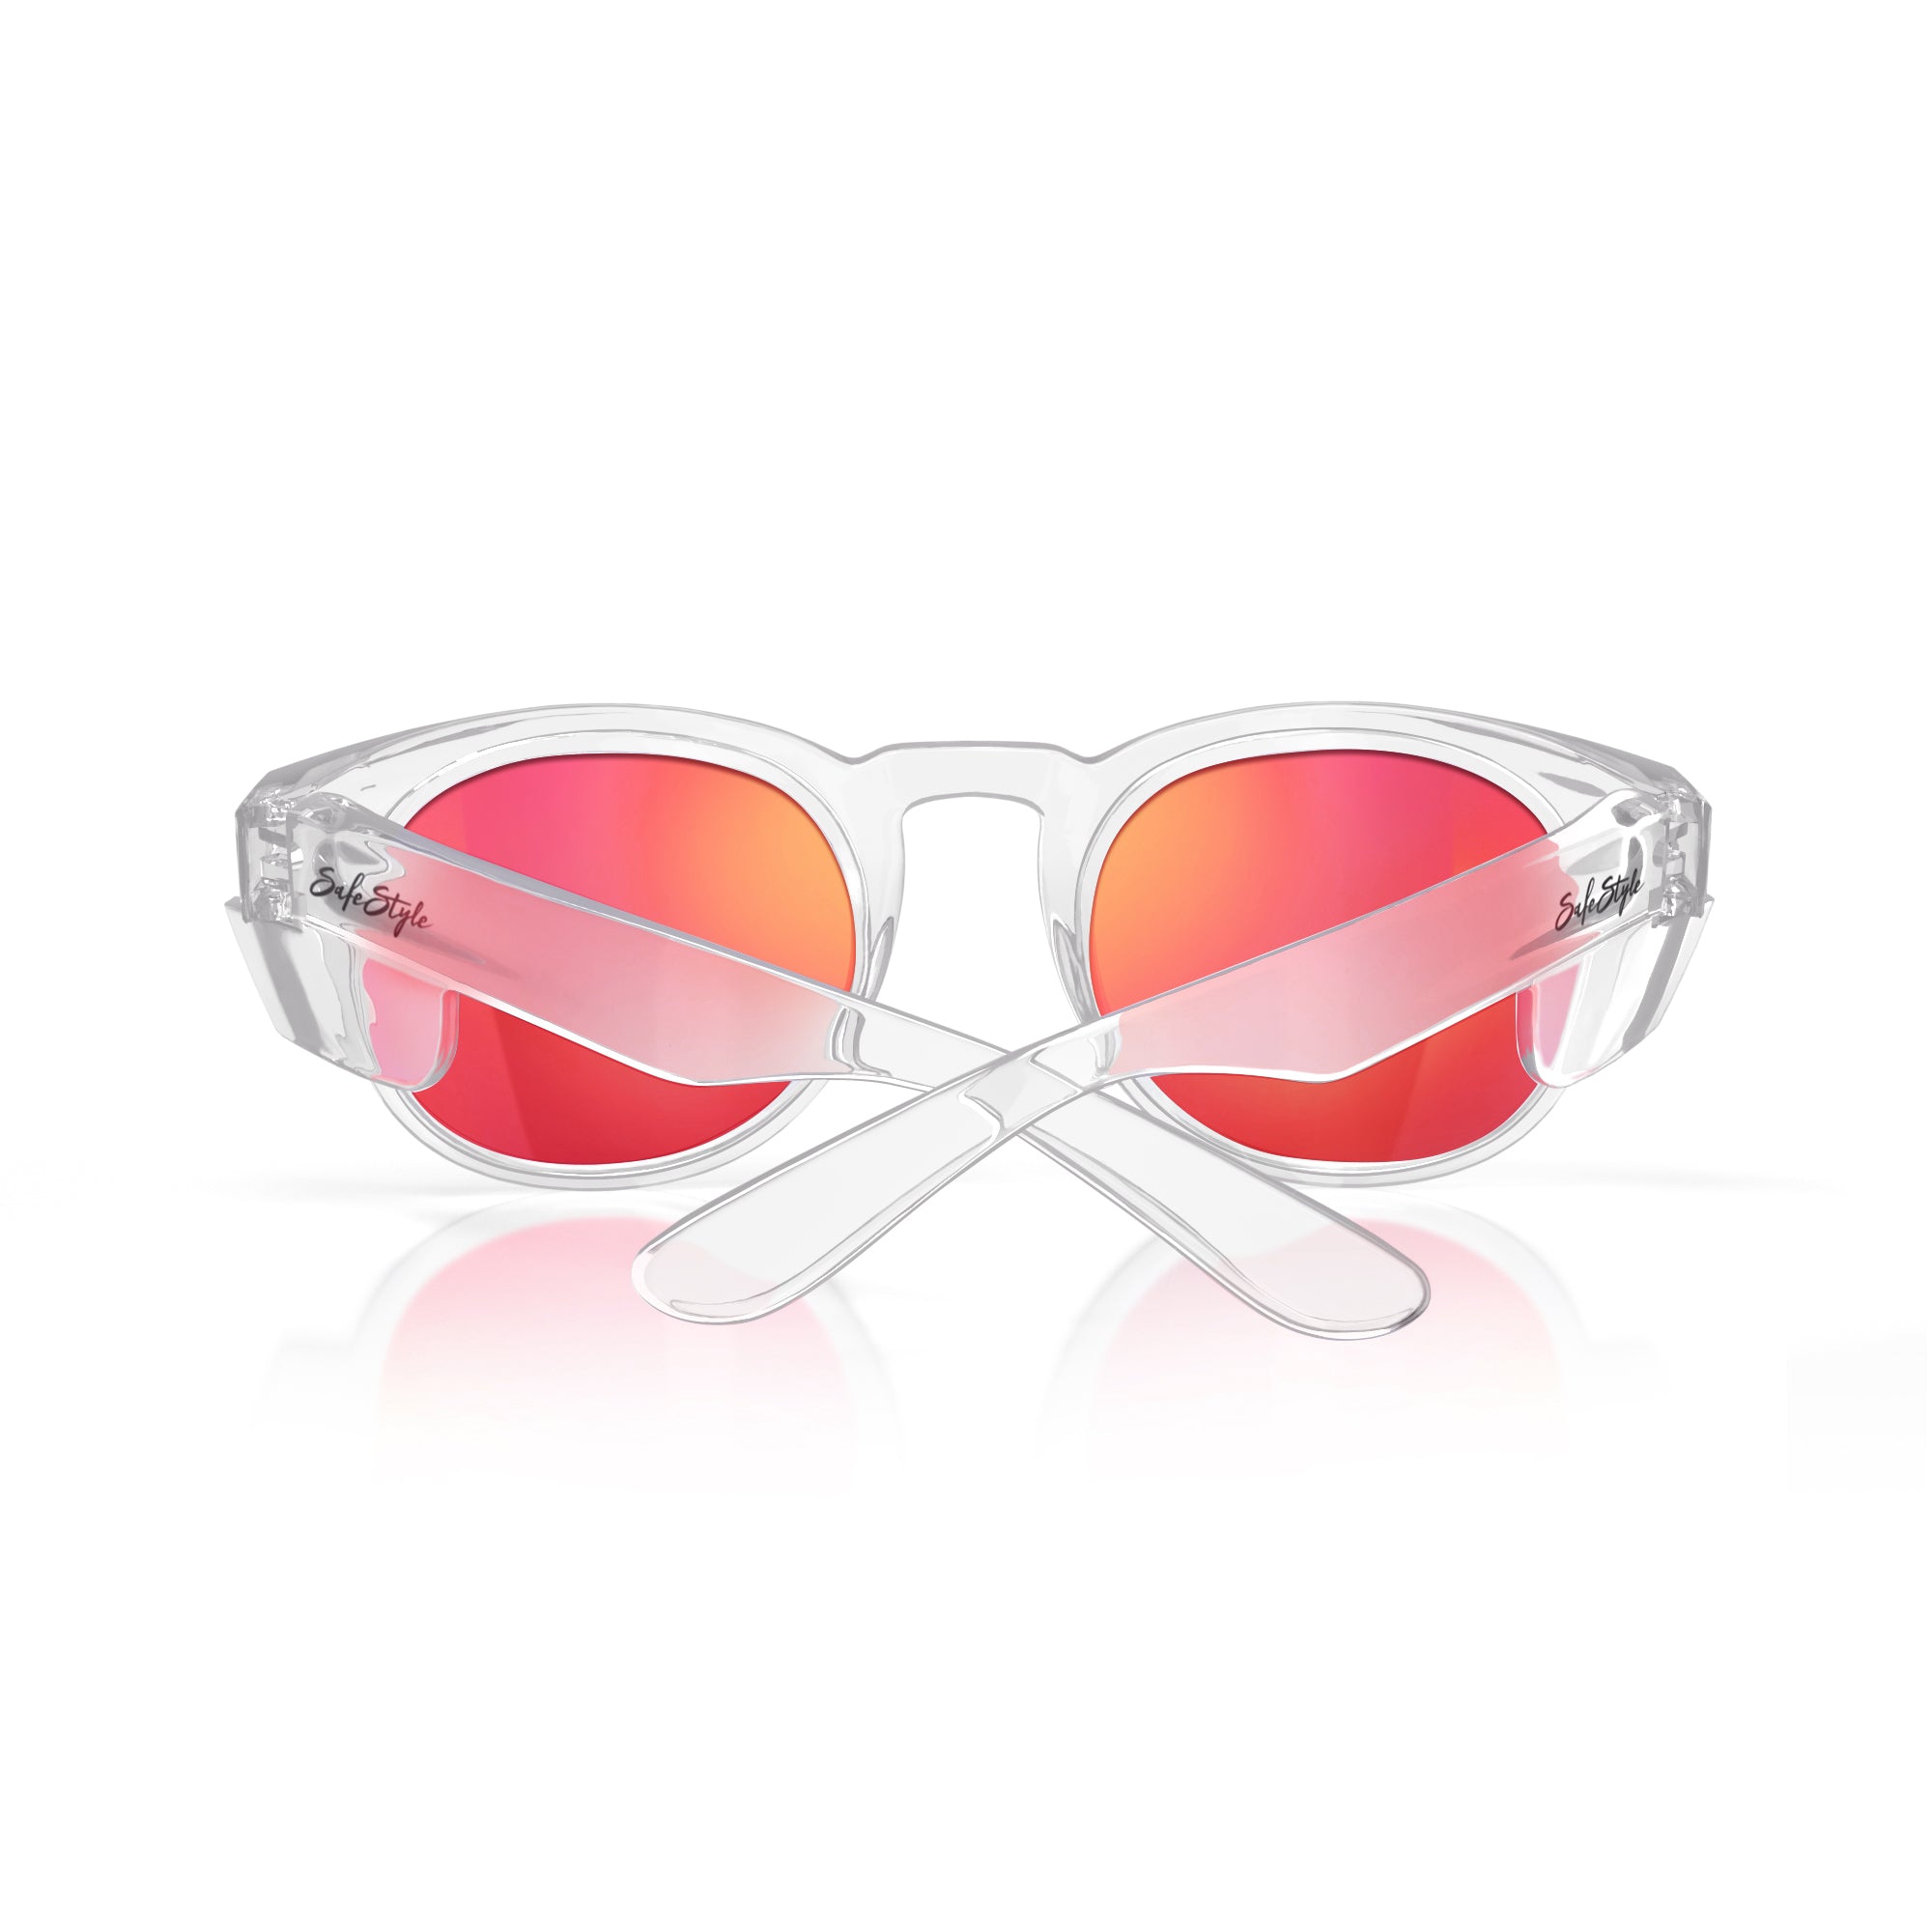 Safestyle - CRCRP100 - Crusiers Clear Frame Mirror red Polarised Lens